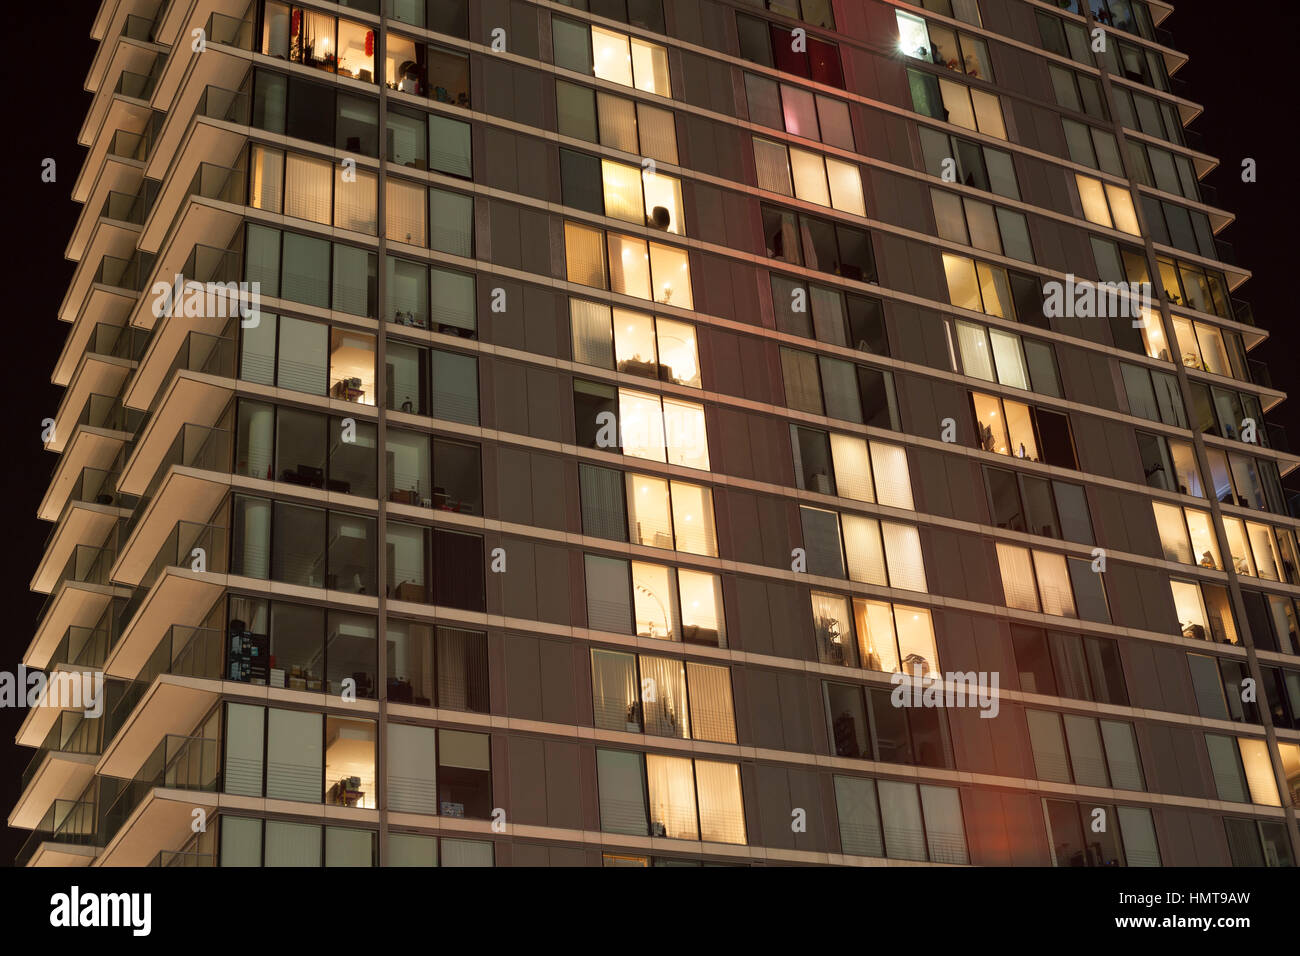 Modern apartment block at night themes of apartment home city life Stock Photo